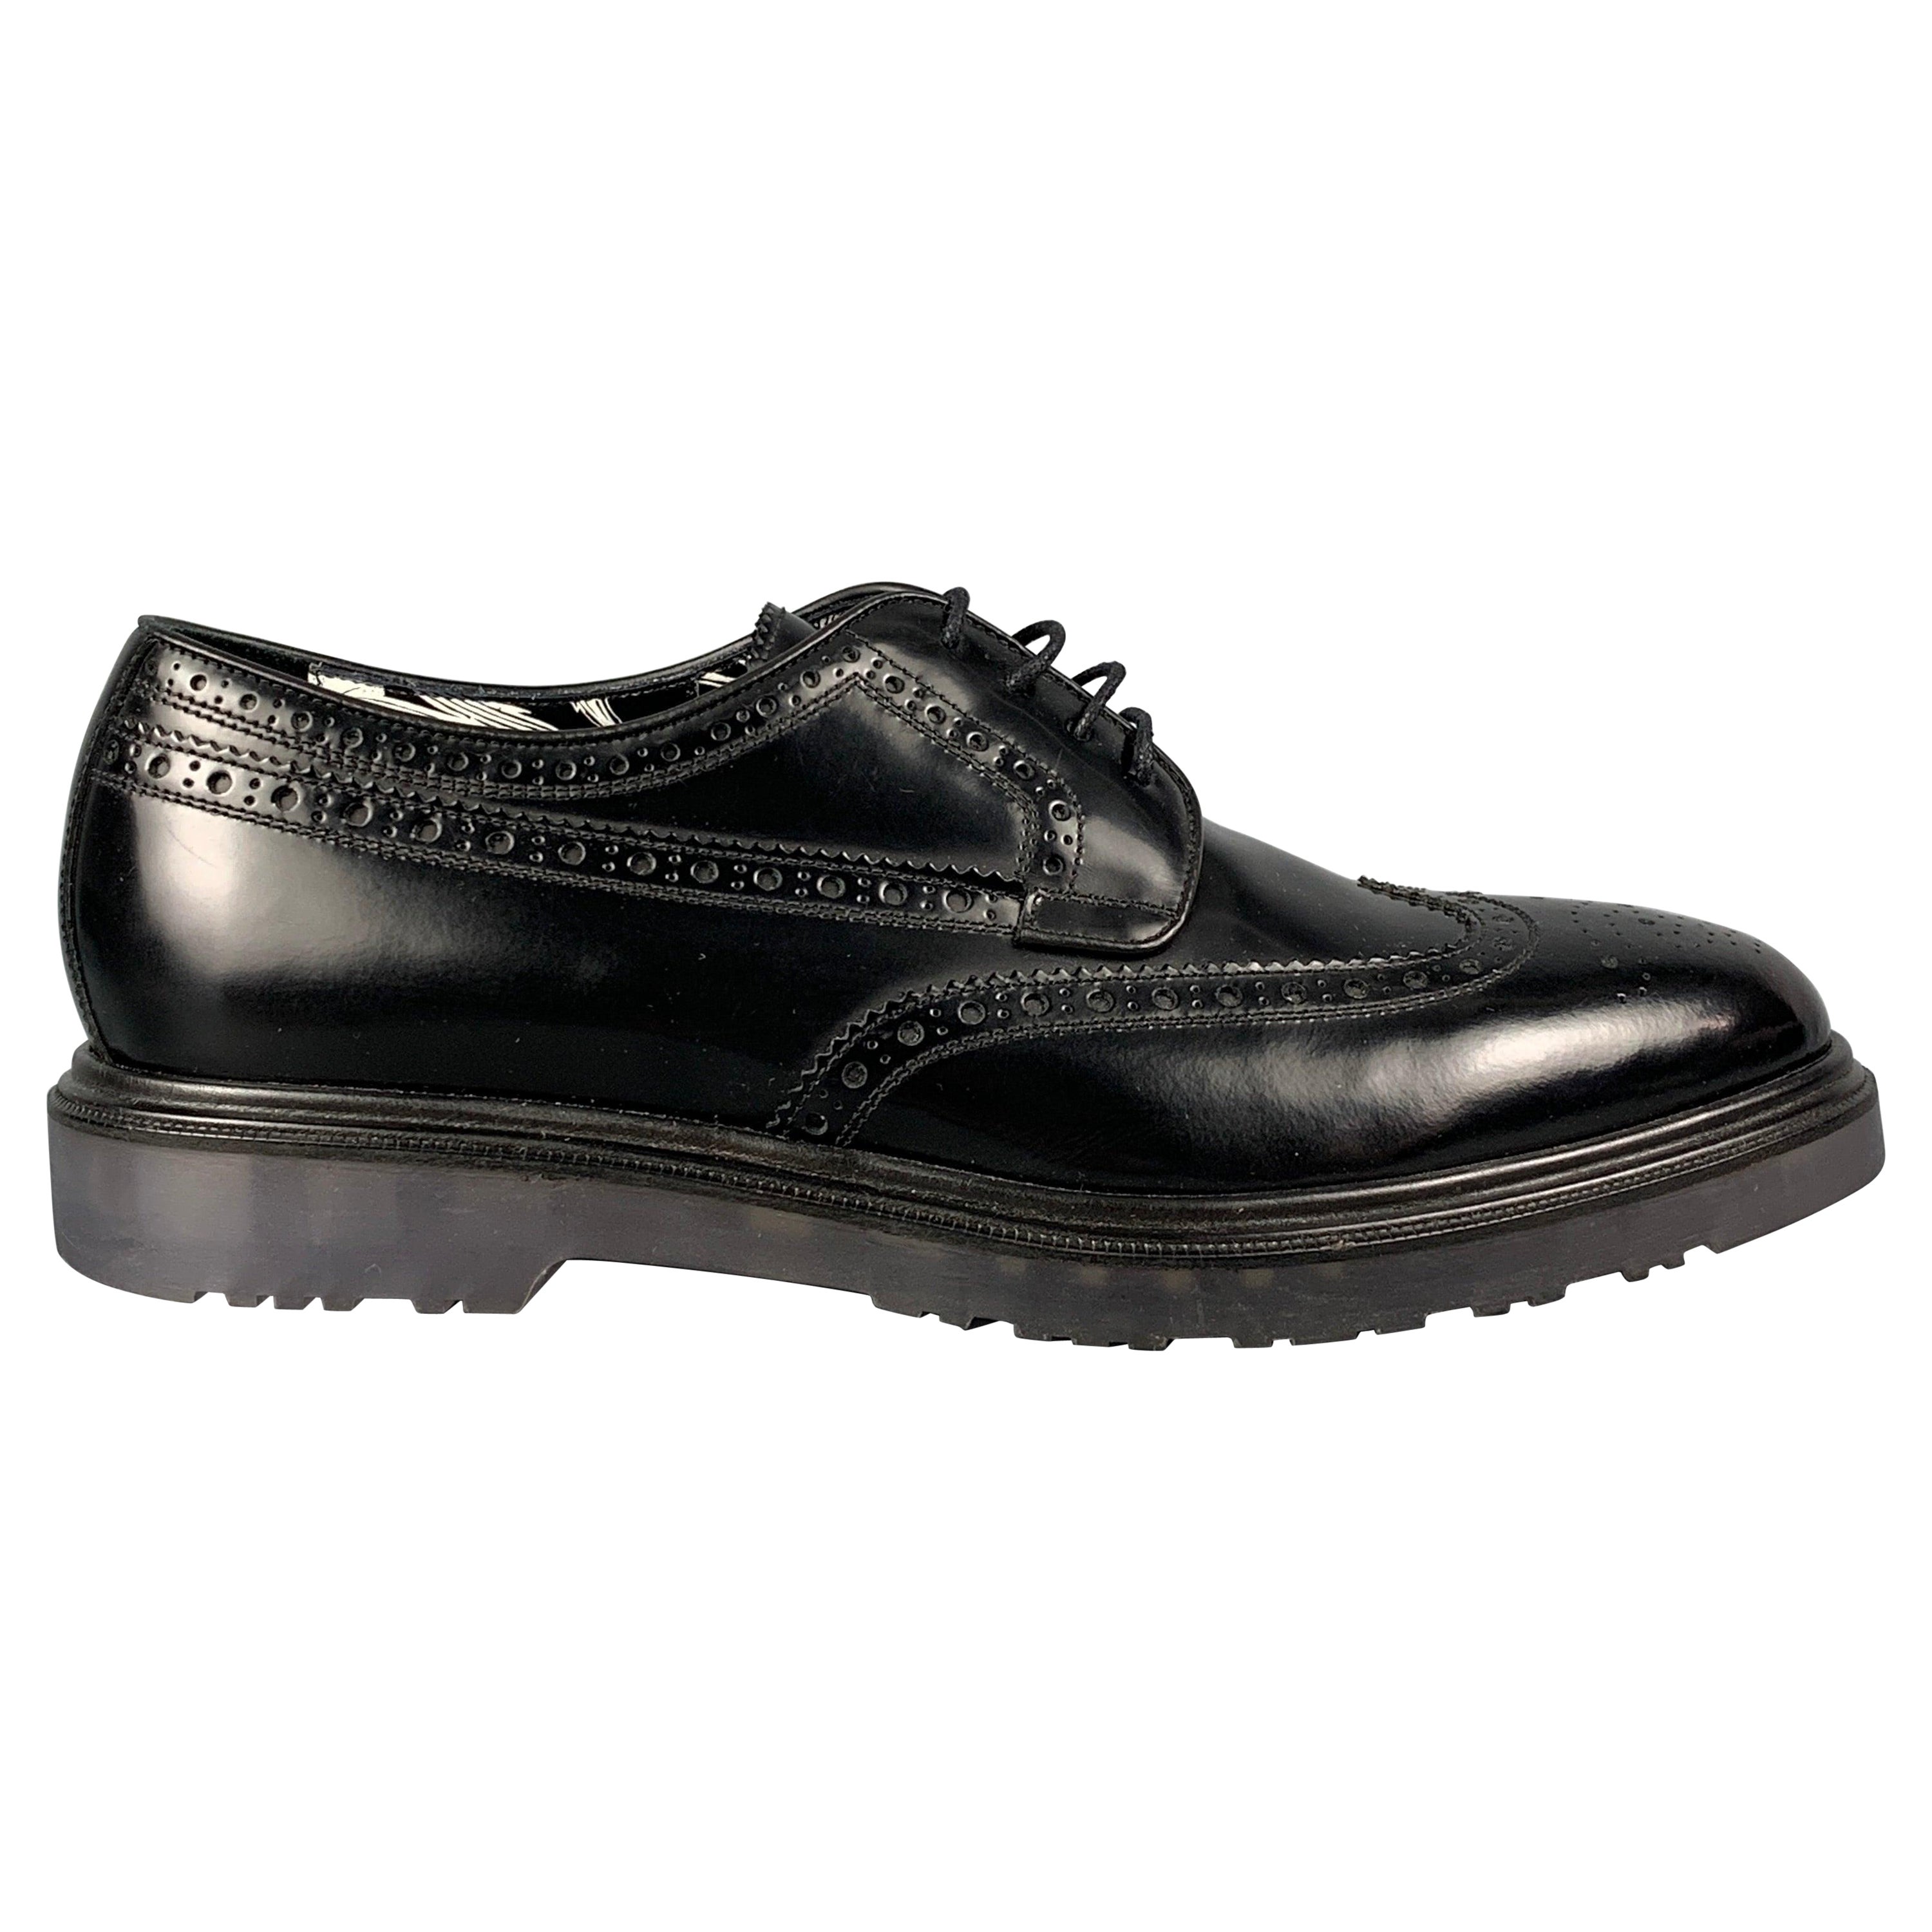 PAUL SMITH Size 9 Black Perforated Leather Wingtip Lace Up Shoes For Sale